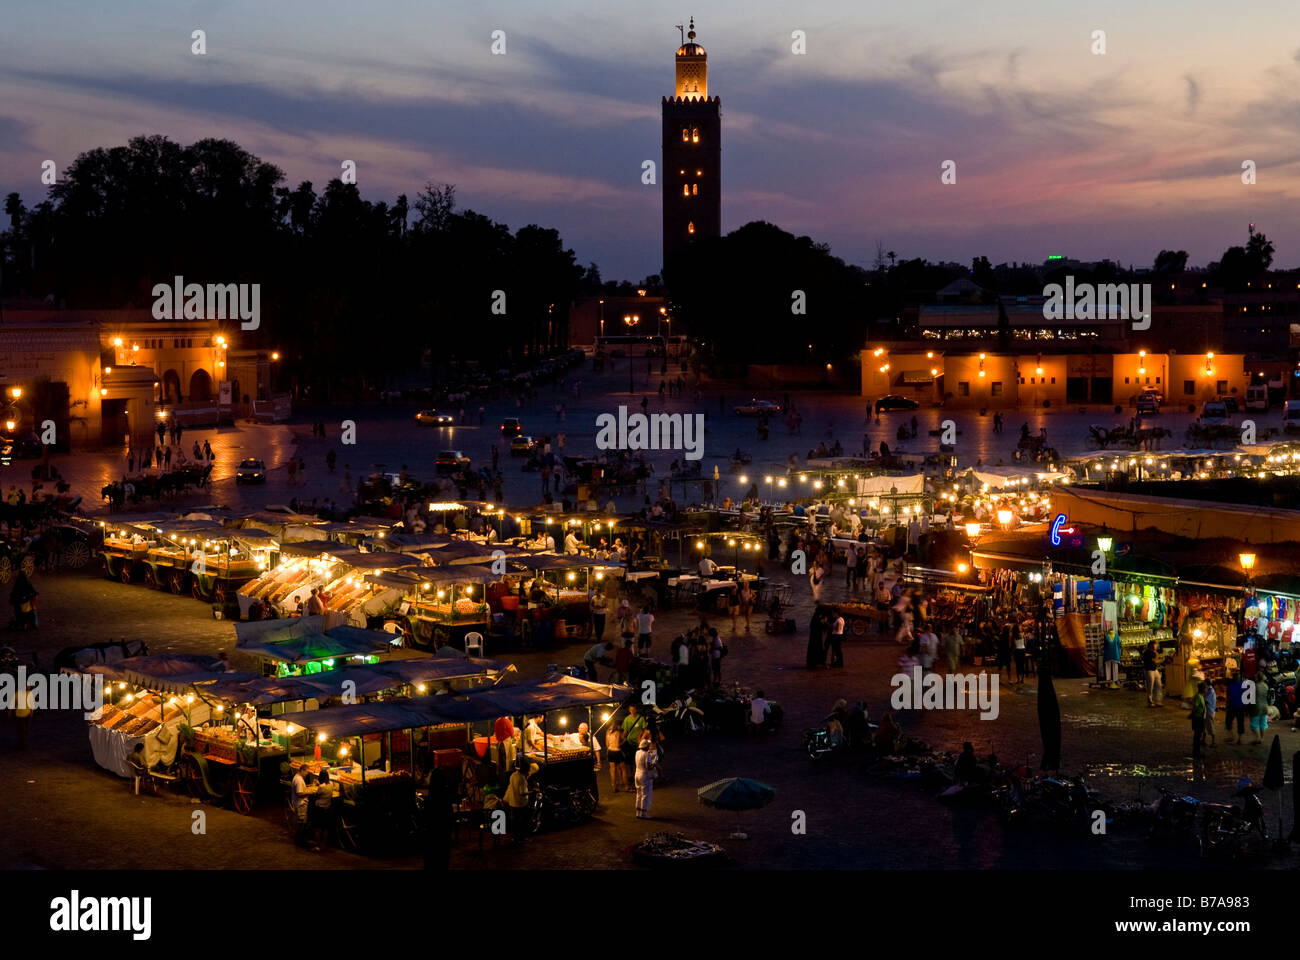 Main square Djemna El Fna with Koutoubia mosque at sunset in Marrakech, Morocco, Africa Stock Photo